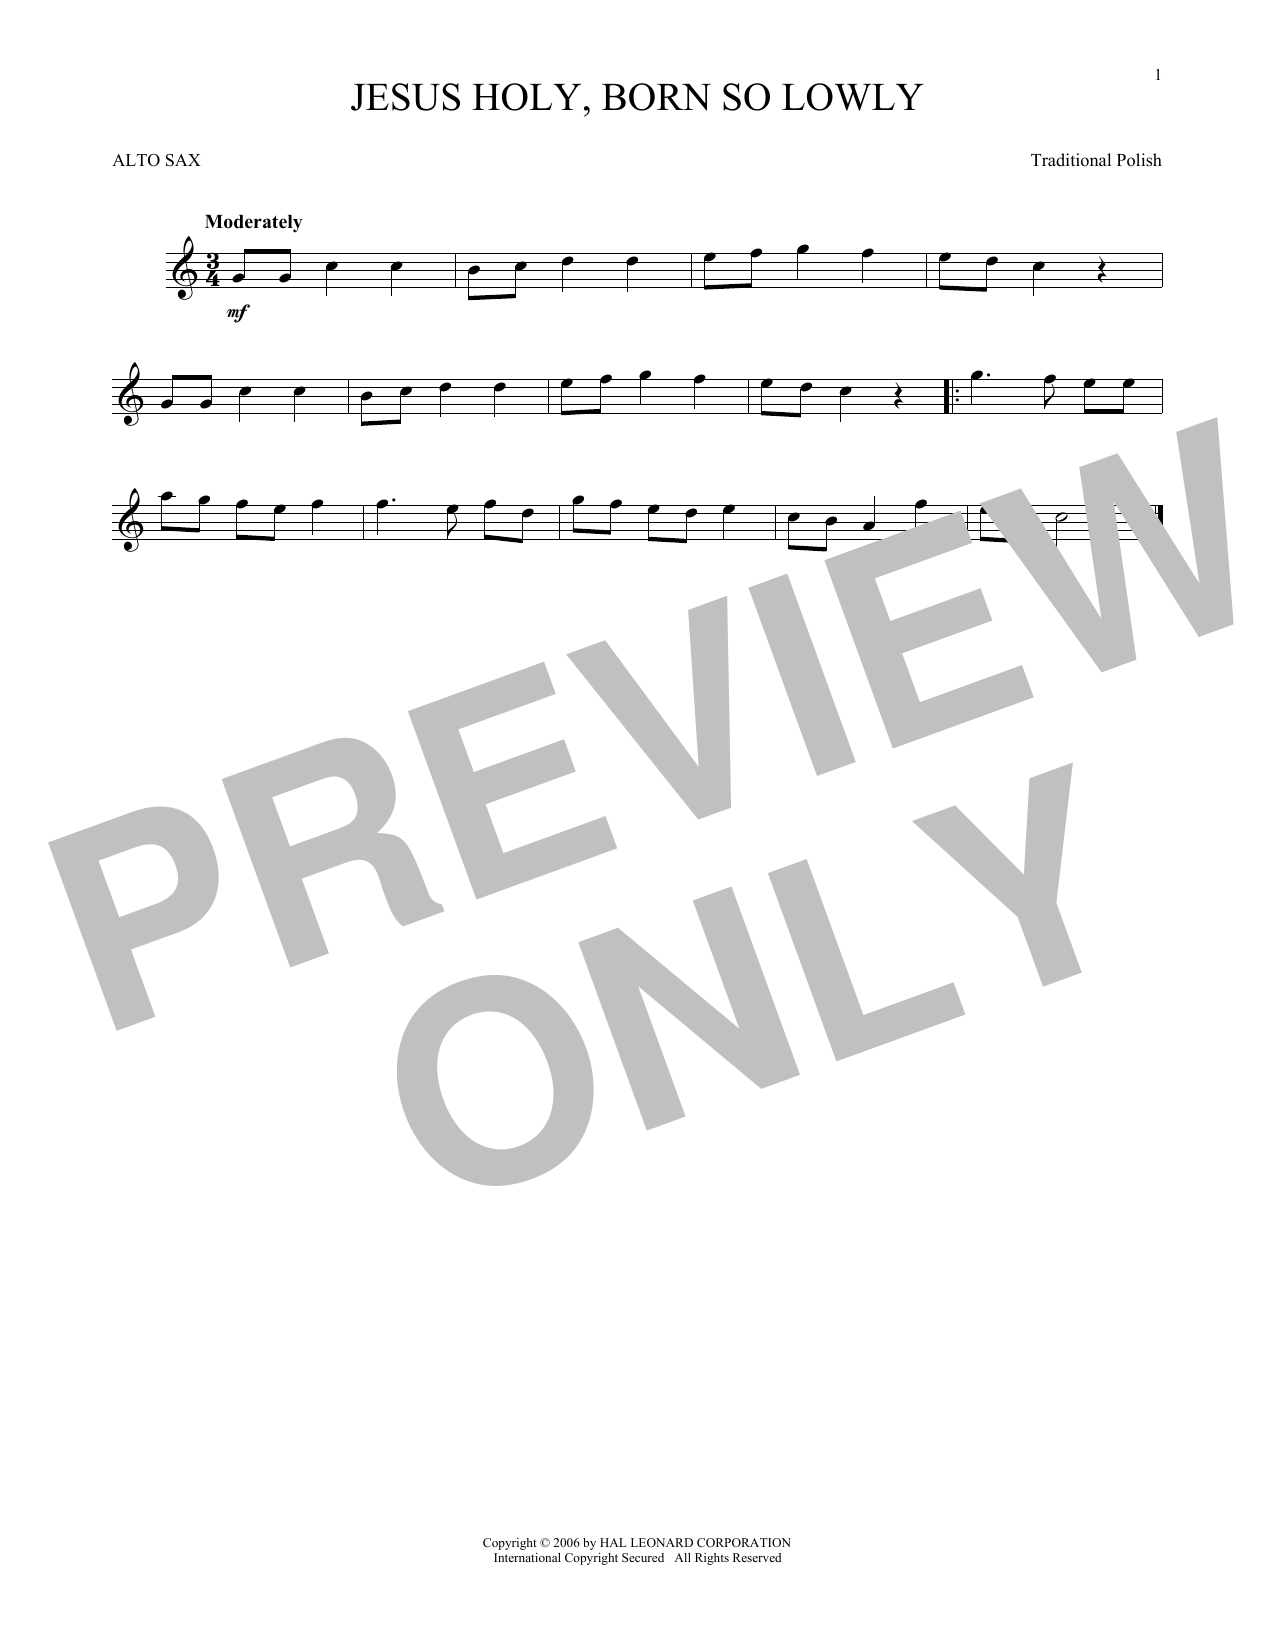 Download Traditional Polish Jesus Holy, Born So Lowly Sheet Music